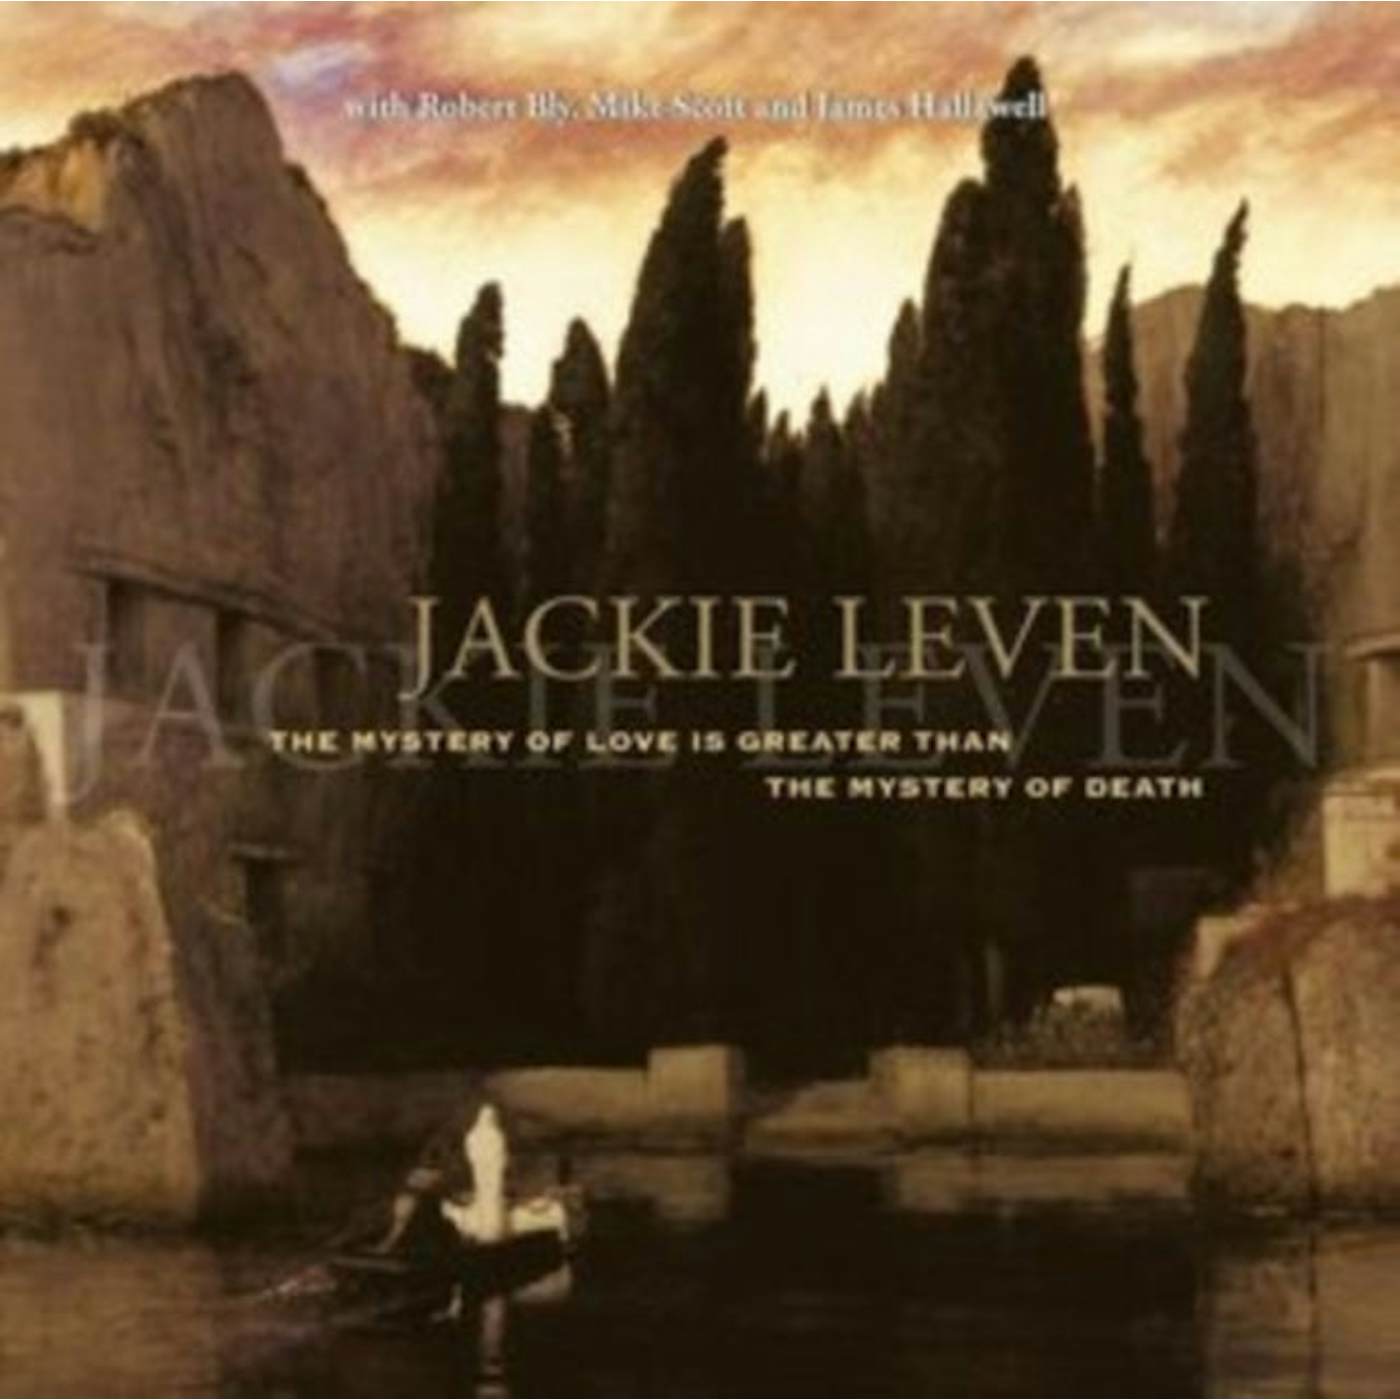 Jackie Leven LP Vinyl Record - The Mystery Of Love (Is Greater Than The Mystery Of Death)